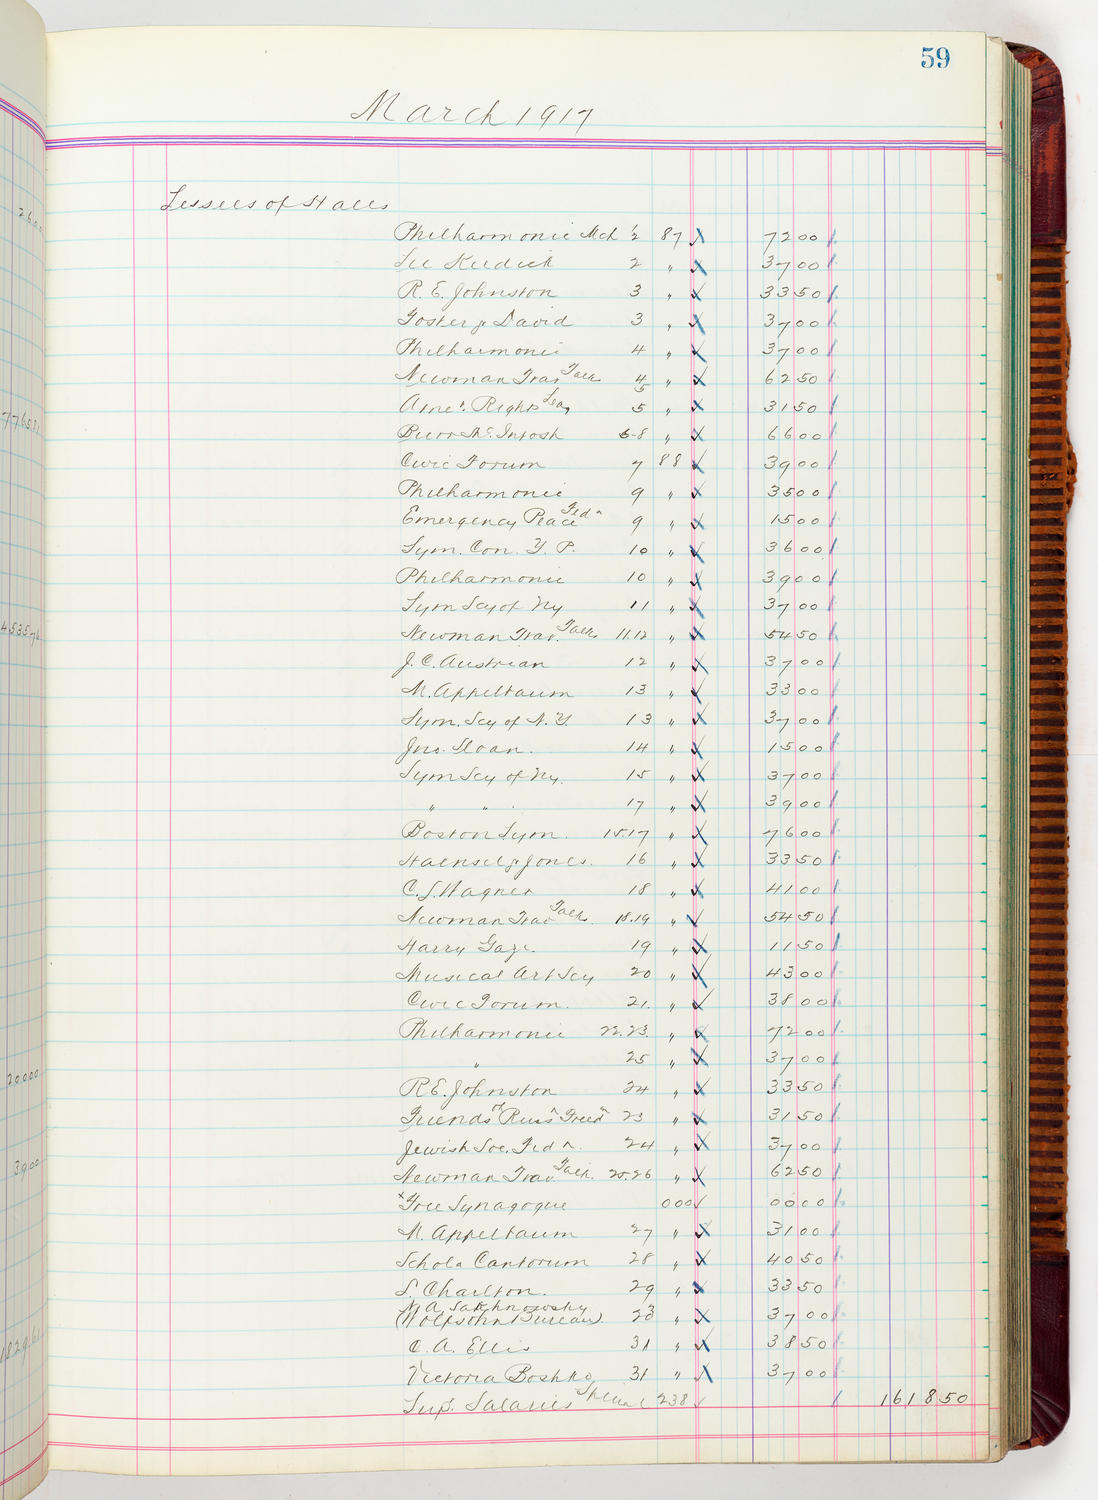 Music Hall Accounting Ledger, volume 5, page 59